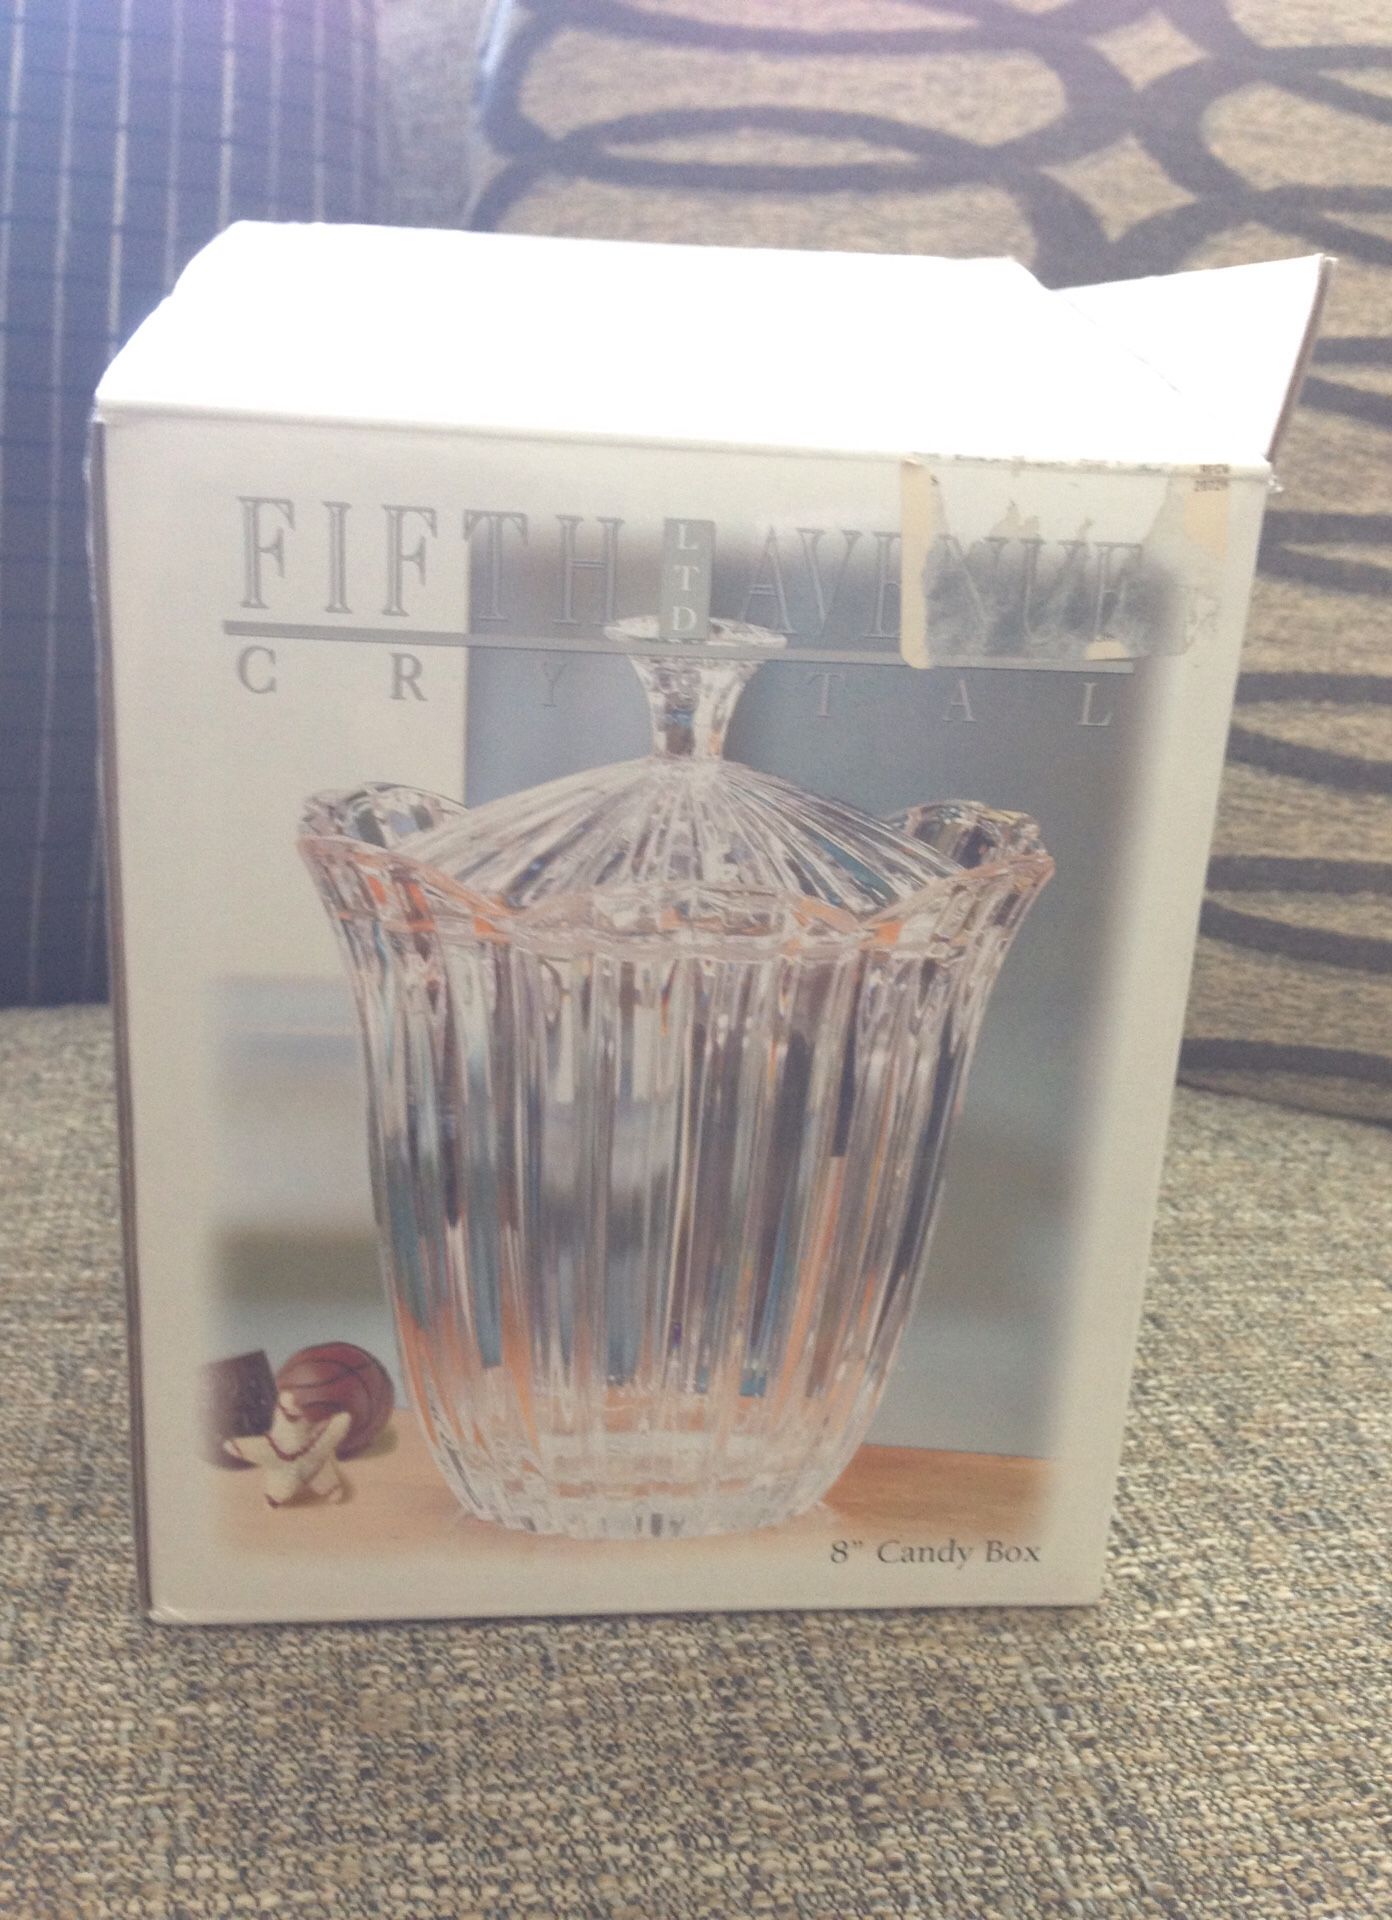 FIFTH LTD AVENUE Crystal Candy Box . Please See All The Pictures and Read the description